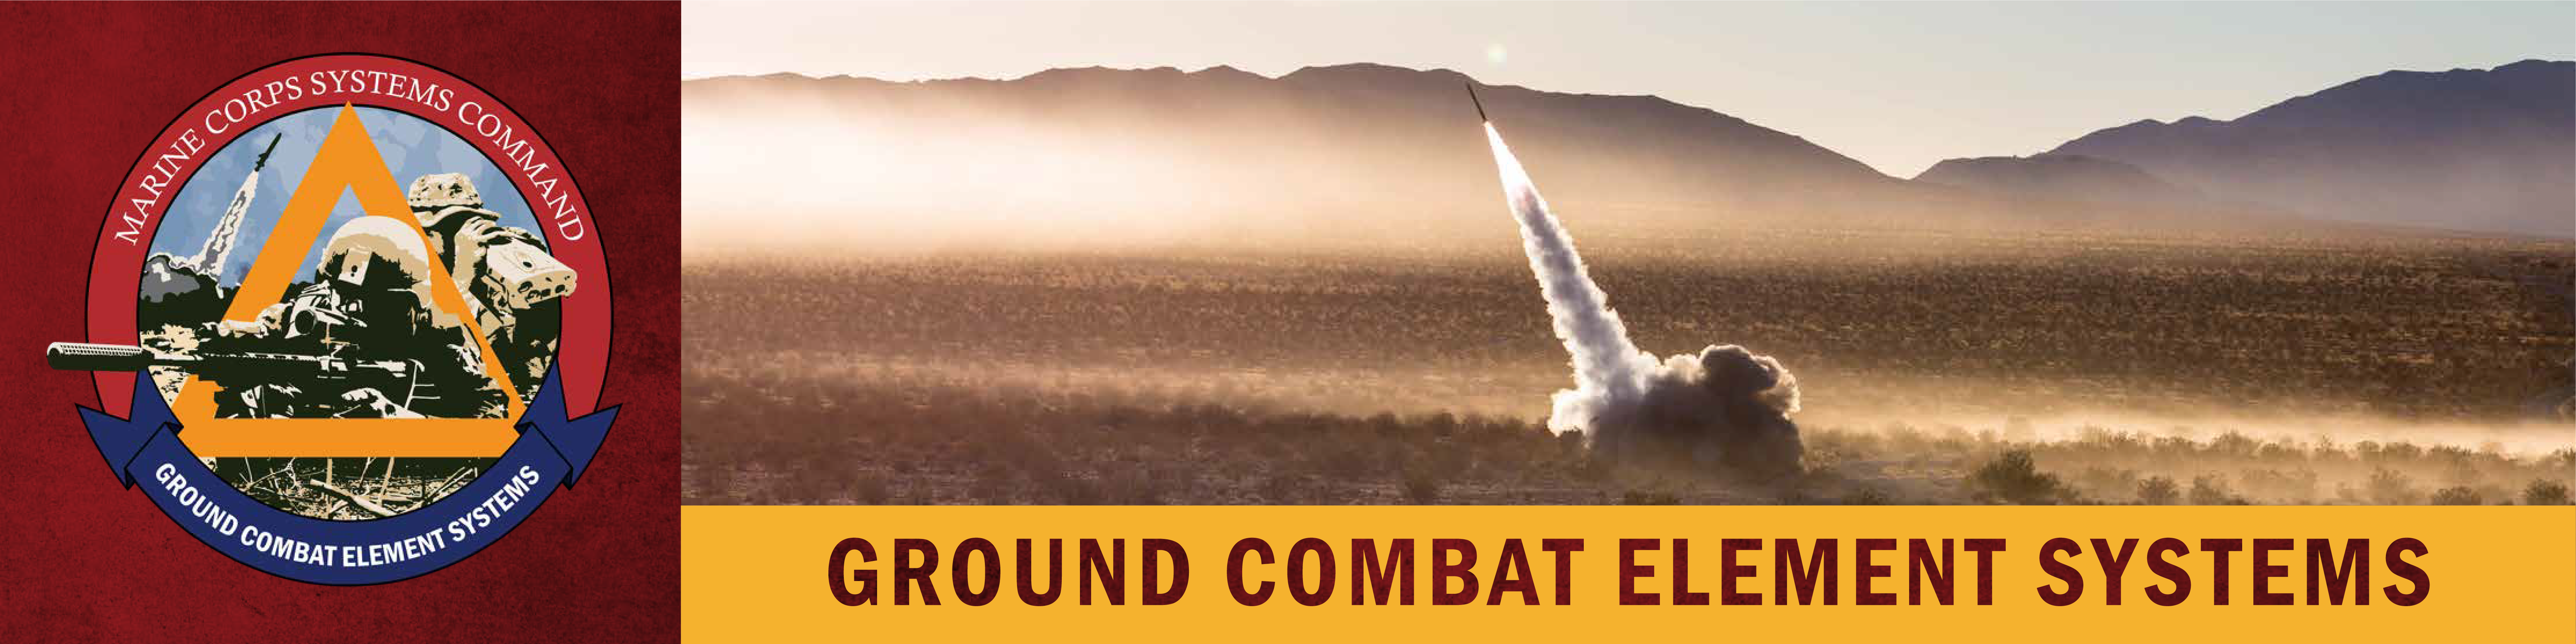 Graphic with seal for GCES, includes photo of a missile launch, text below reads Ground Combat Element Systems